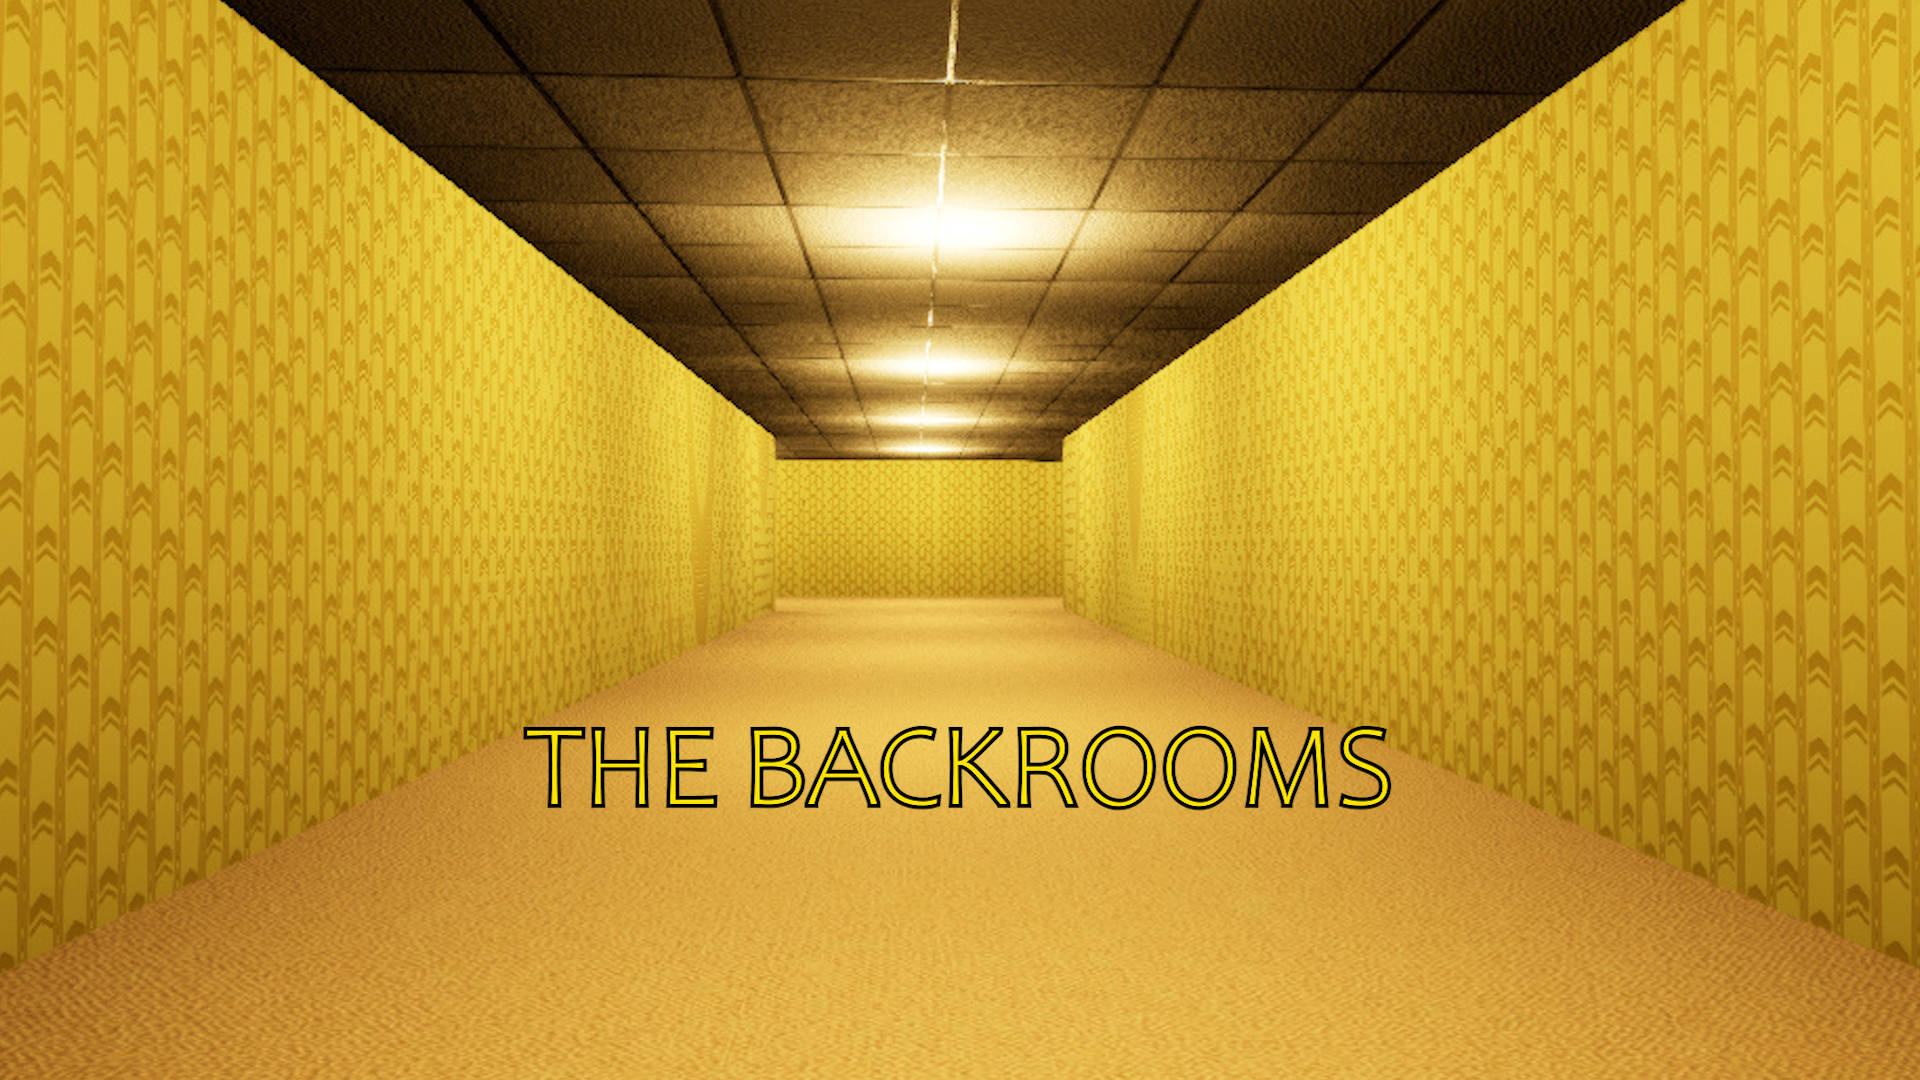 Backrooms of reality - Download